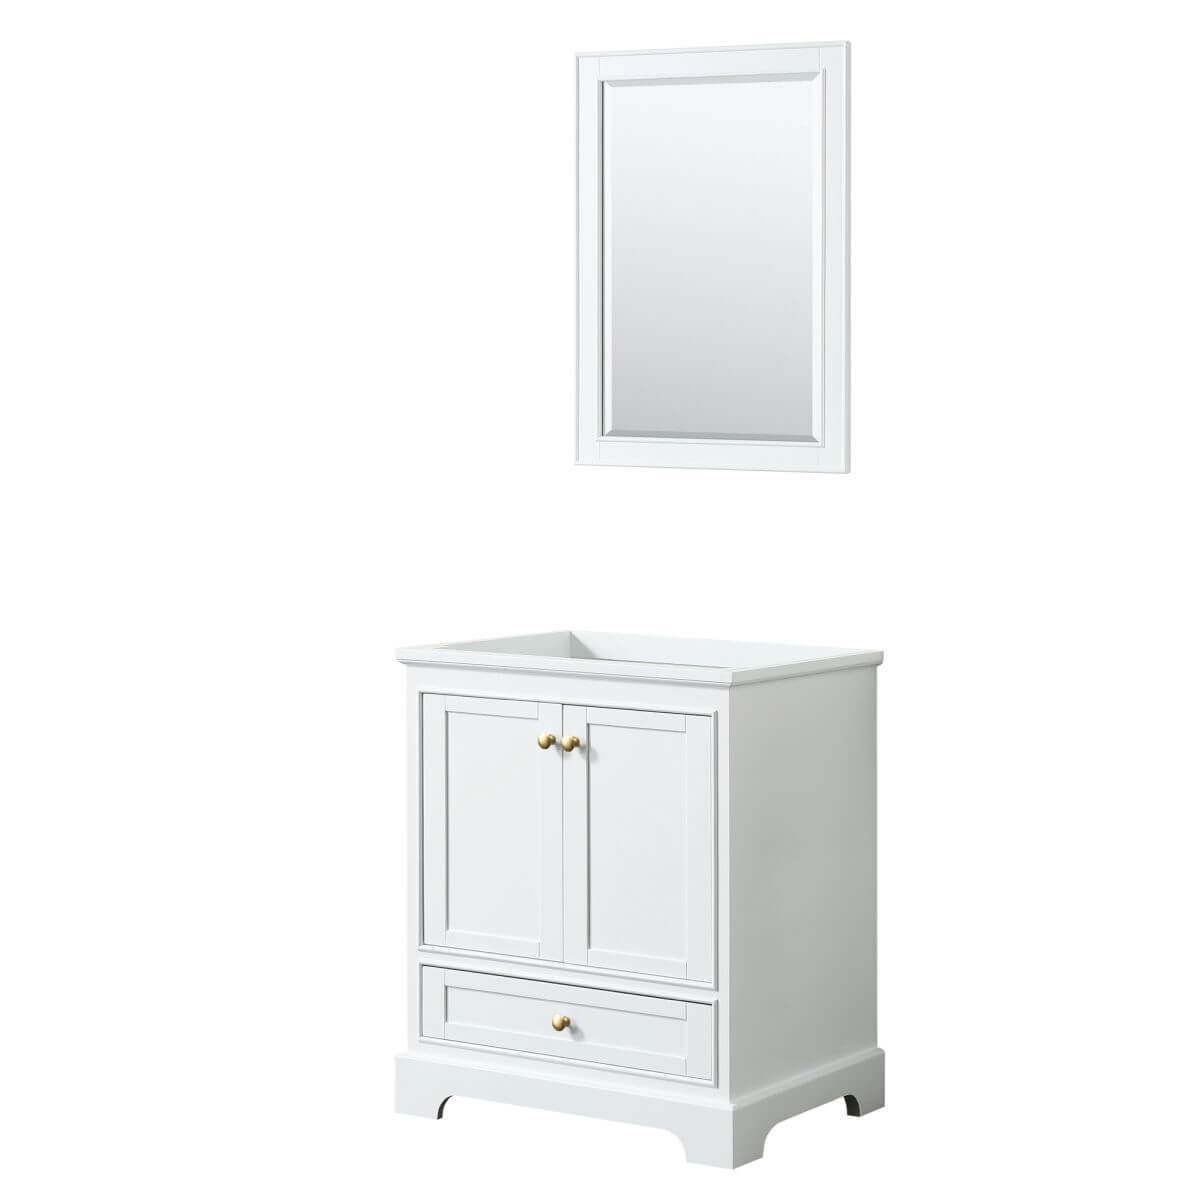 Wyndham Collection Deborah 30 inch Single Bathroom Vanity in White with 24 inch Mirror, Brushed Gold Trim, No Countertop and No Sink - WCS202030SWGCXSXXM24